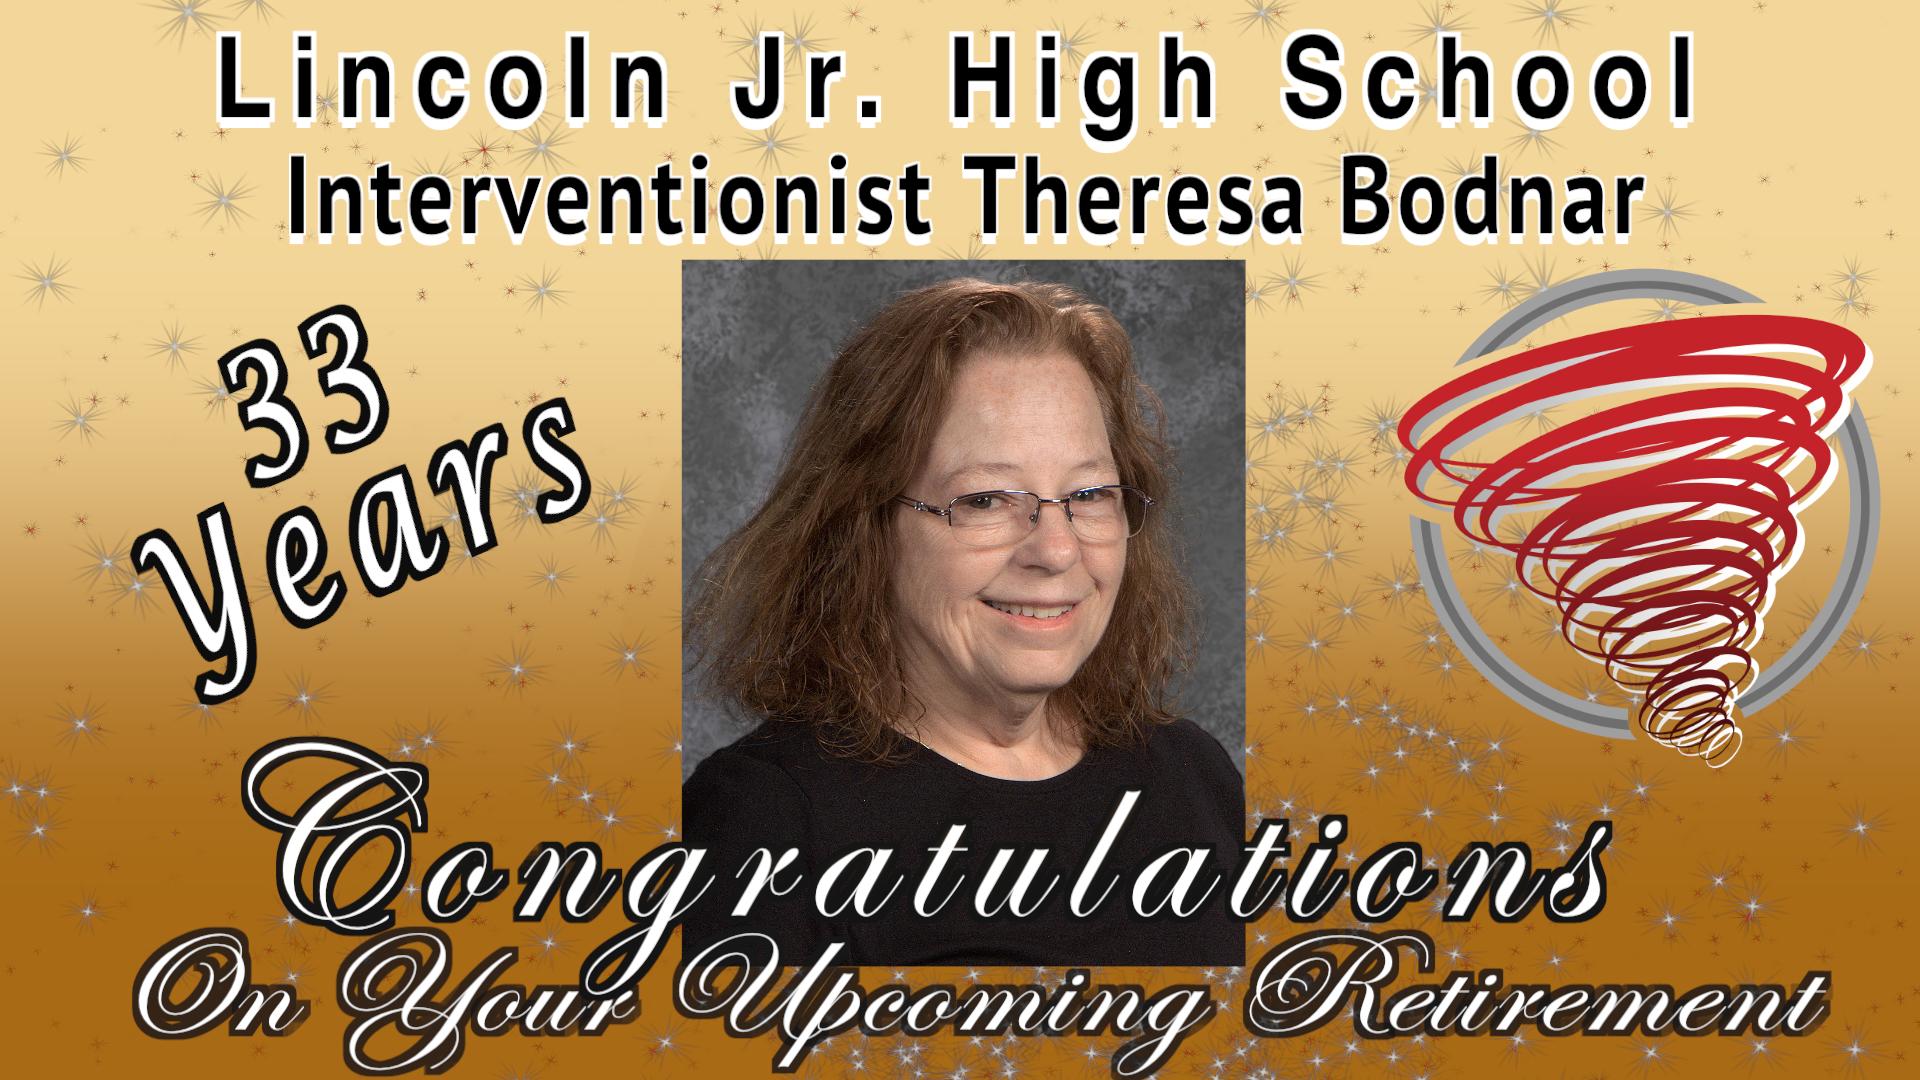 Lincoln Jr. High School Interventionist Theresa Bodnar 33 years Congratulations on your upcoming retirement. Theresa Bodnar picture and LJH Red Storm Logo